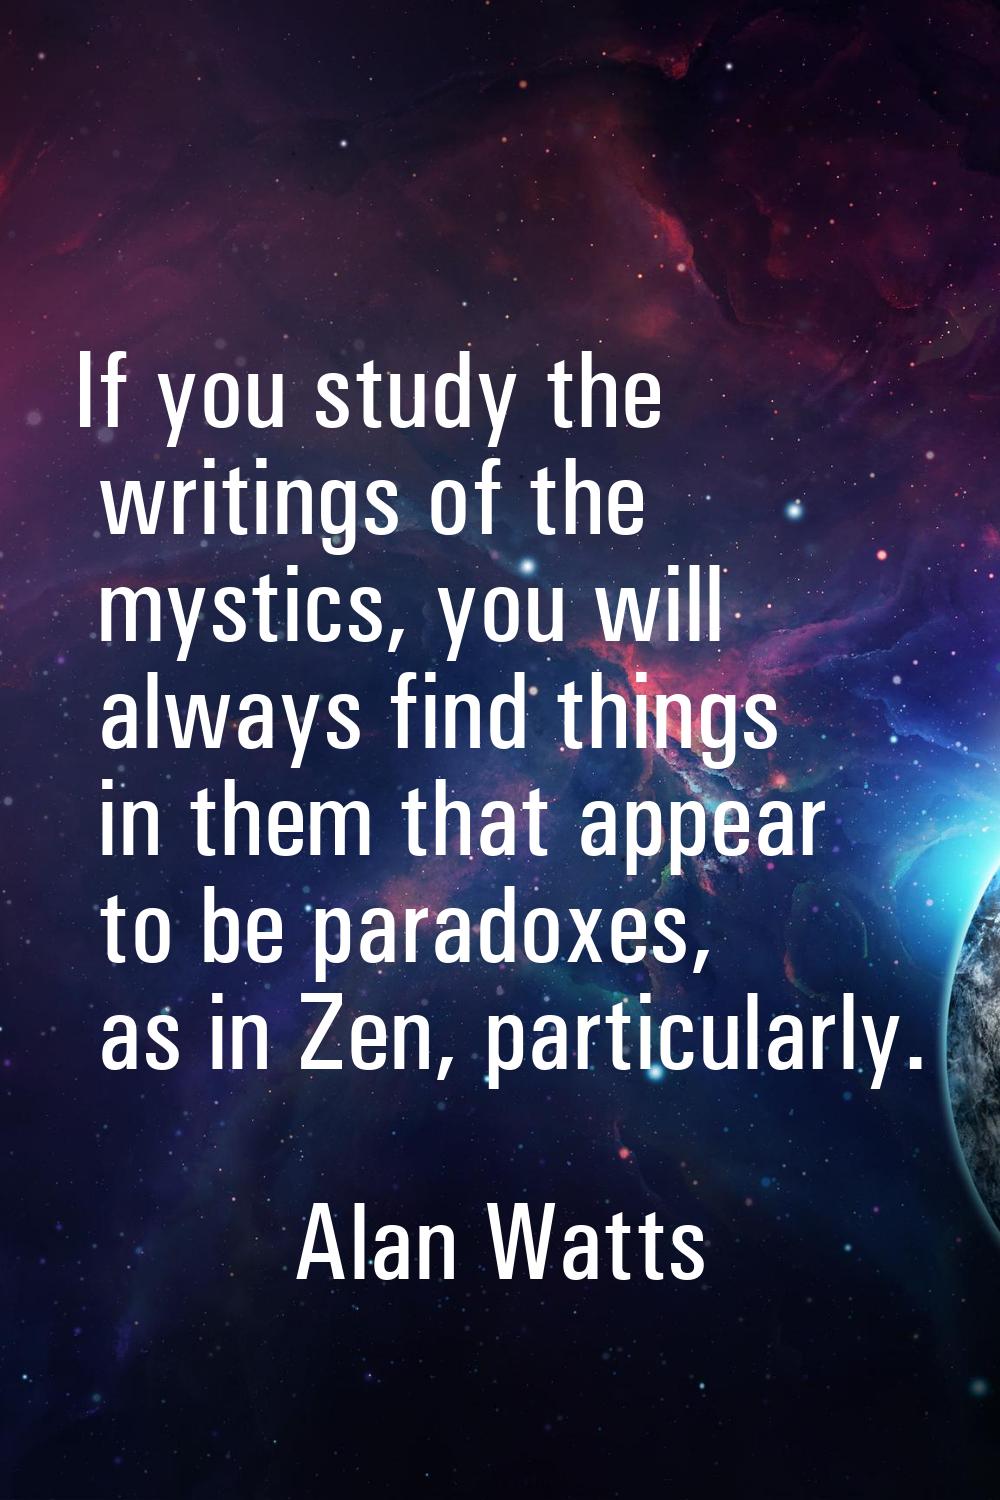 If you study the writings of the mystics, you will always find things in them that appear to be par